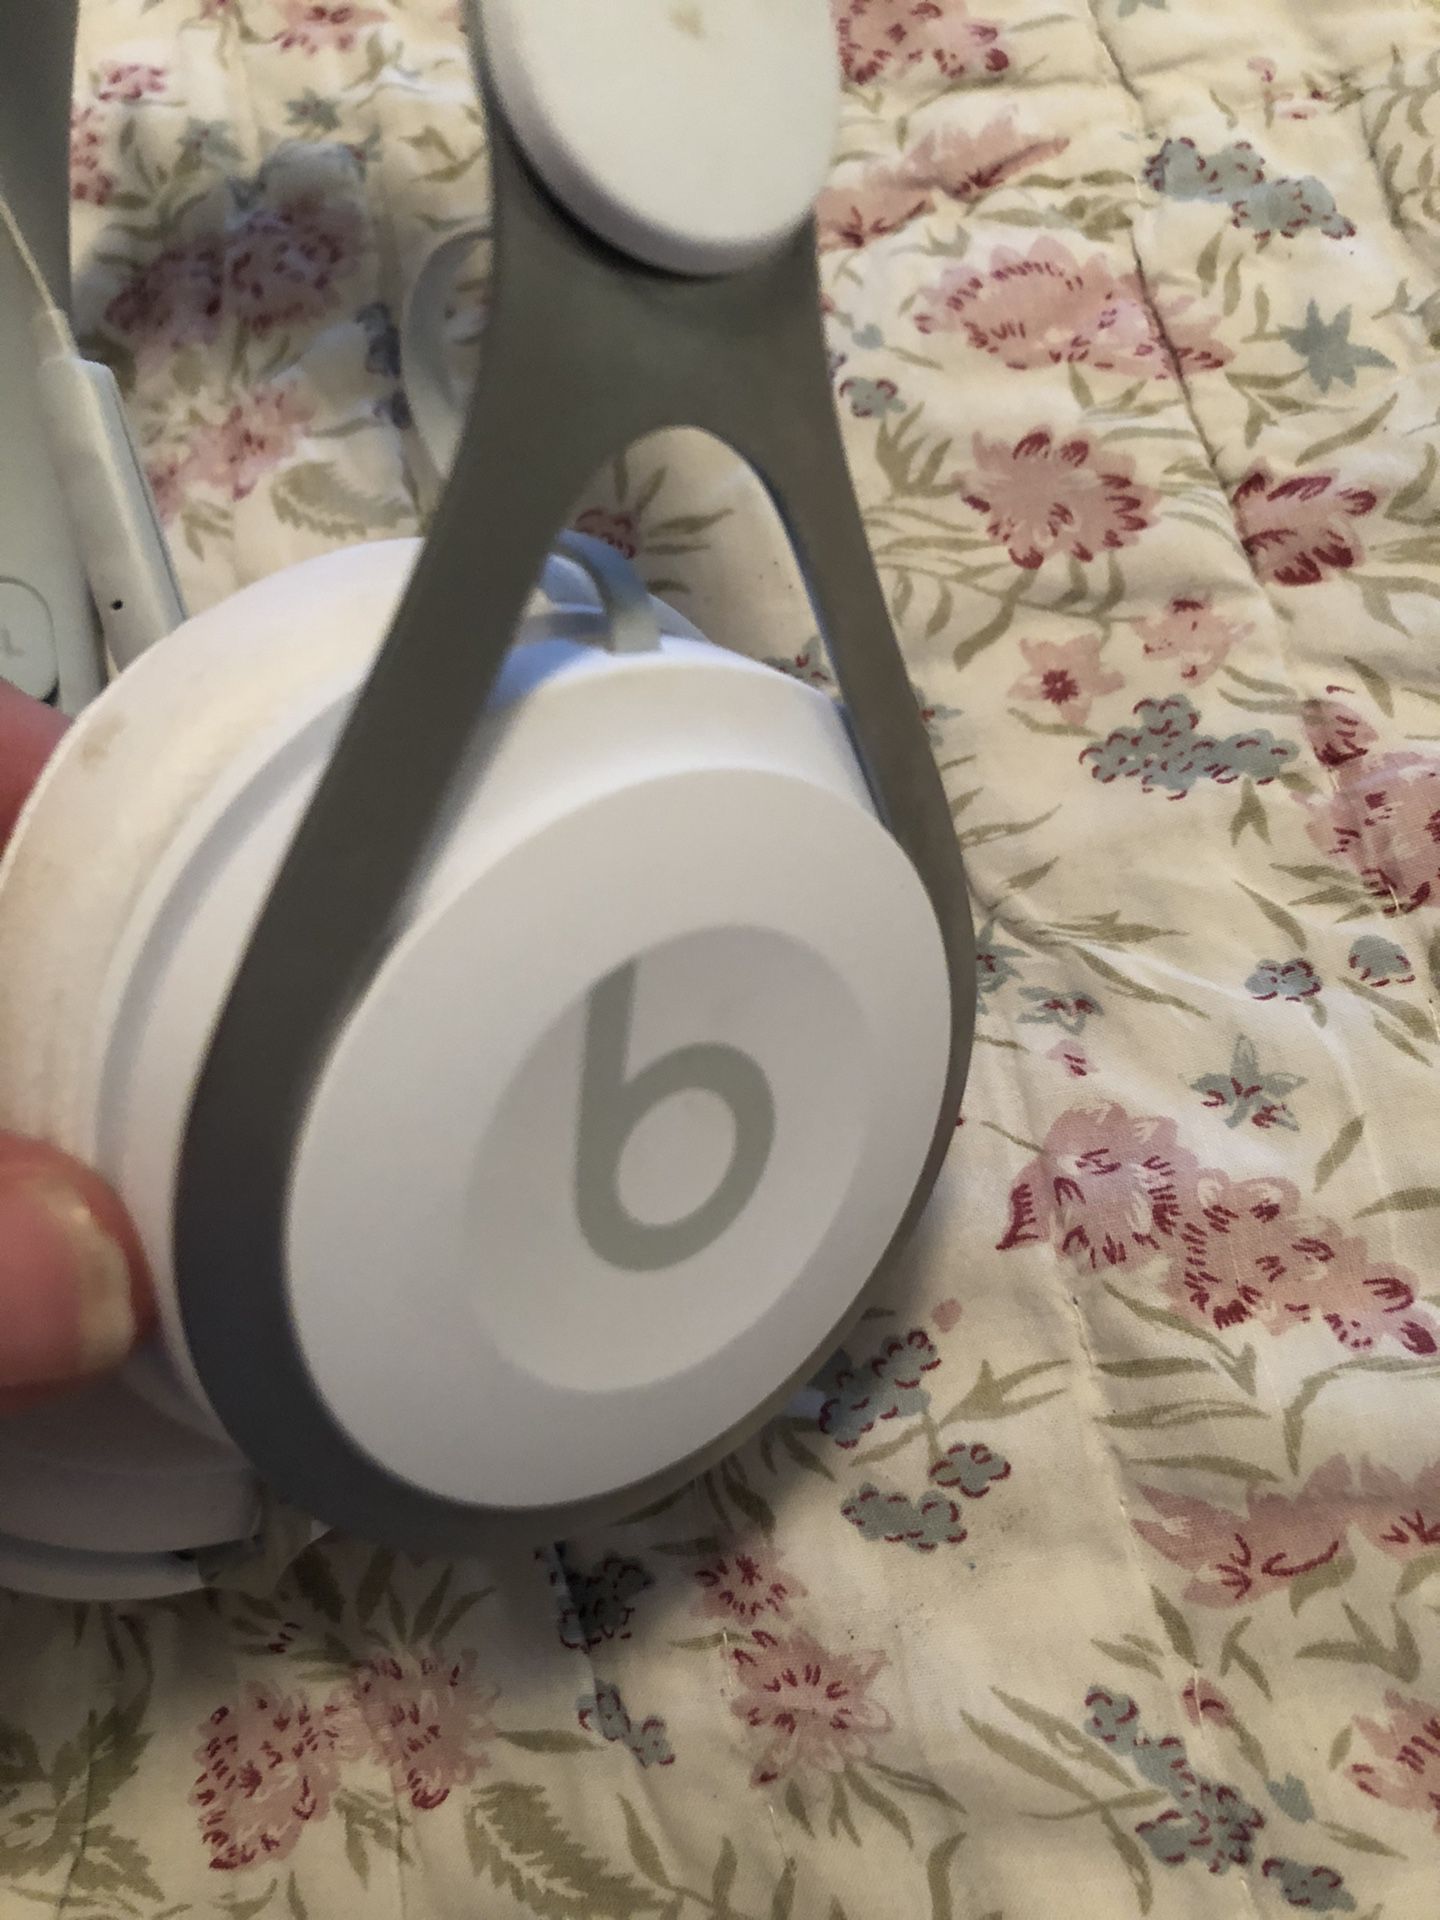 Beats by dr dre white & silver headphones